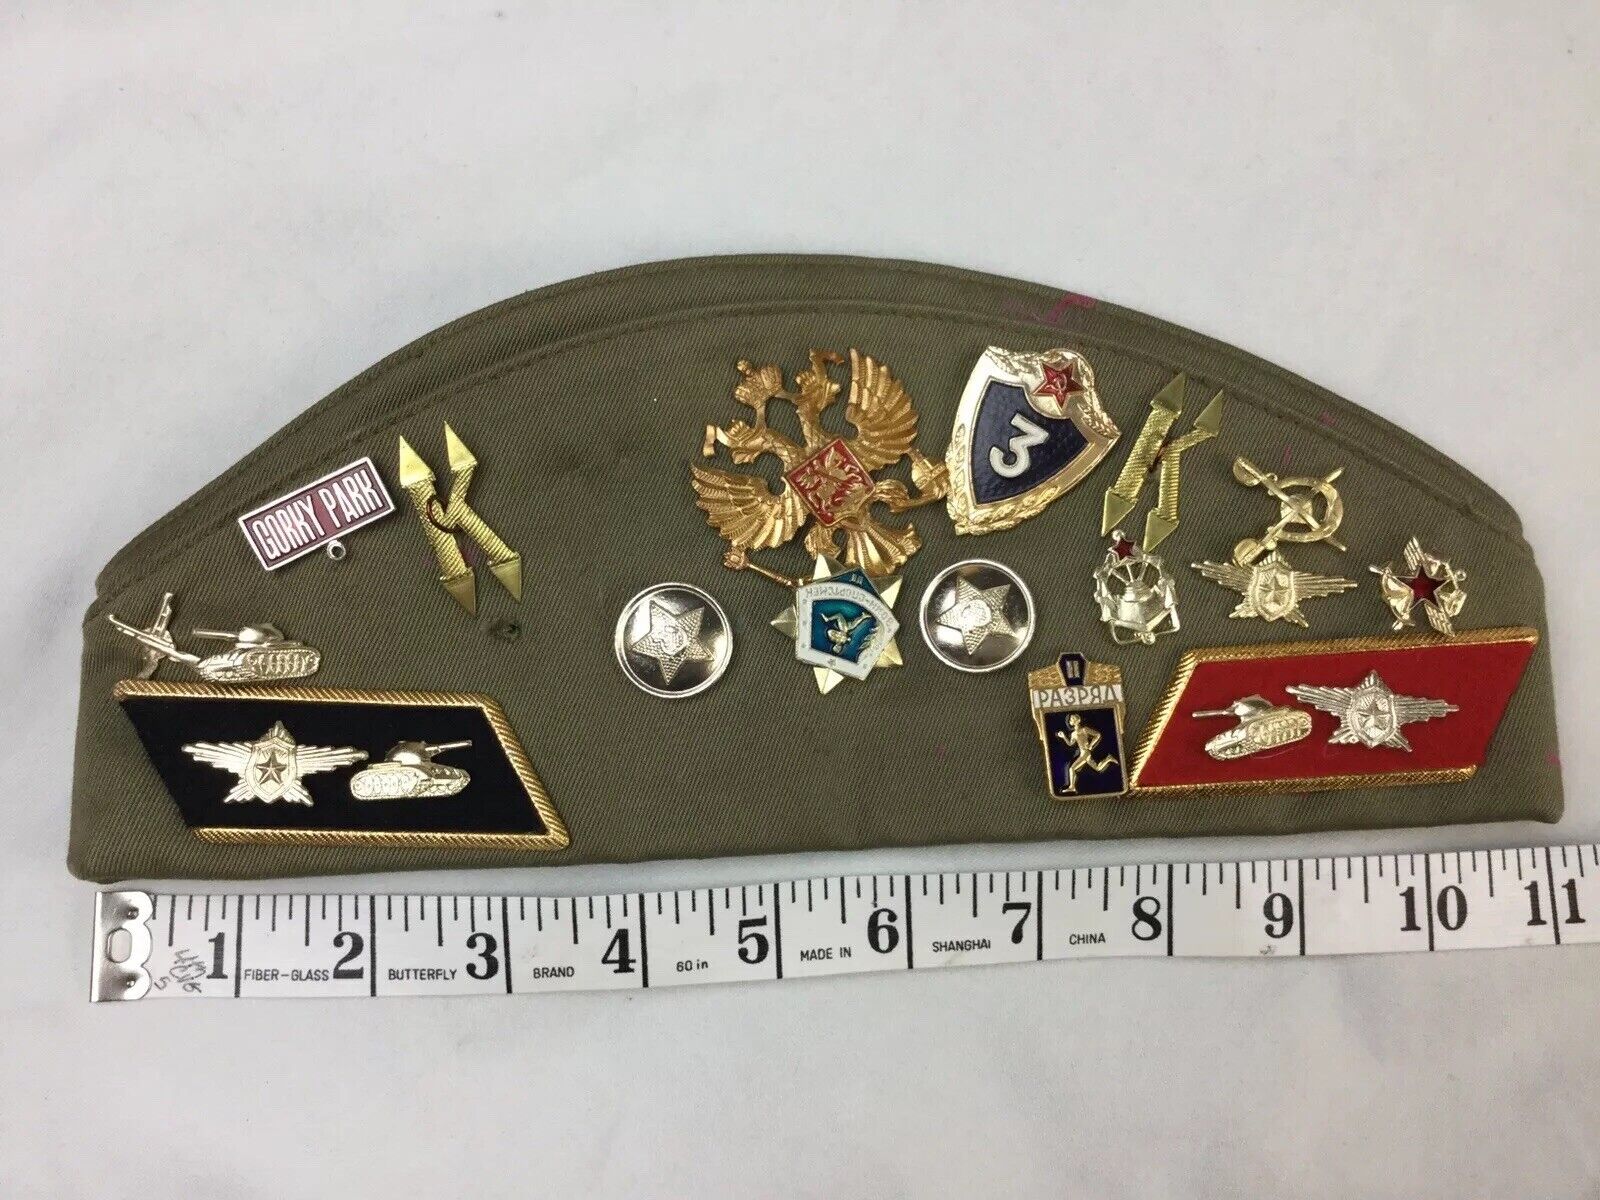 VINTAGE RUSSIAN SOVIET USSR ARMY MILITARY PILOTKA CAP HAT With PINS & PATCHES